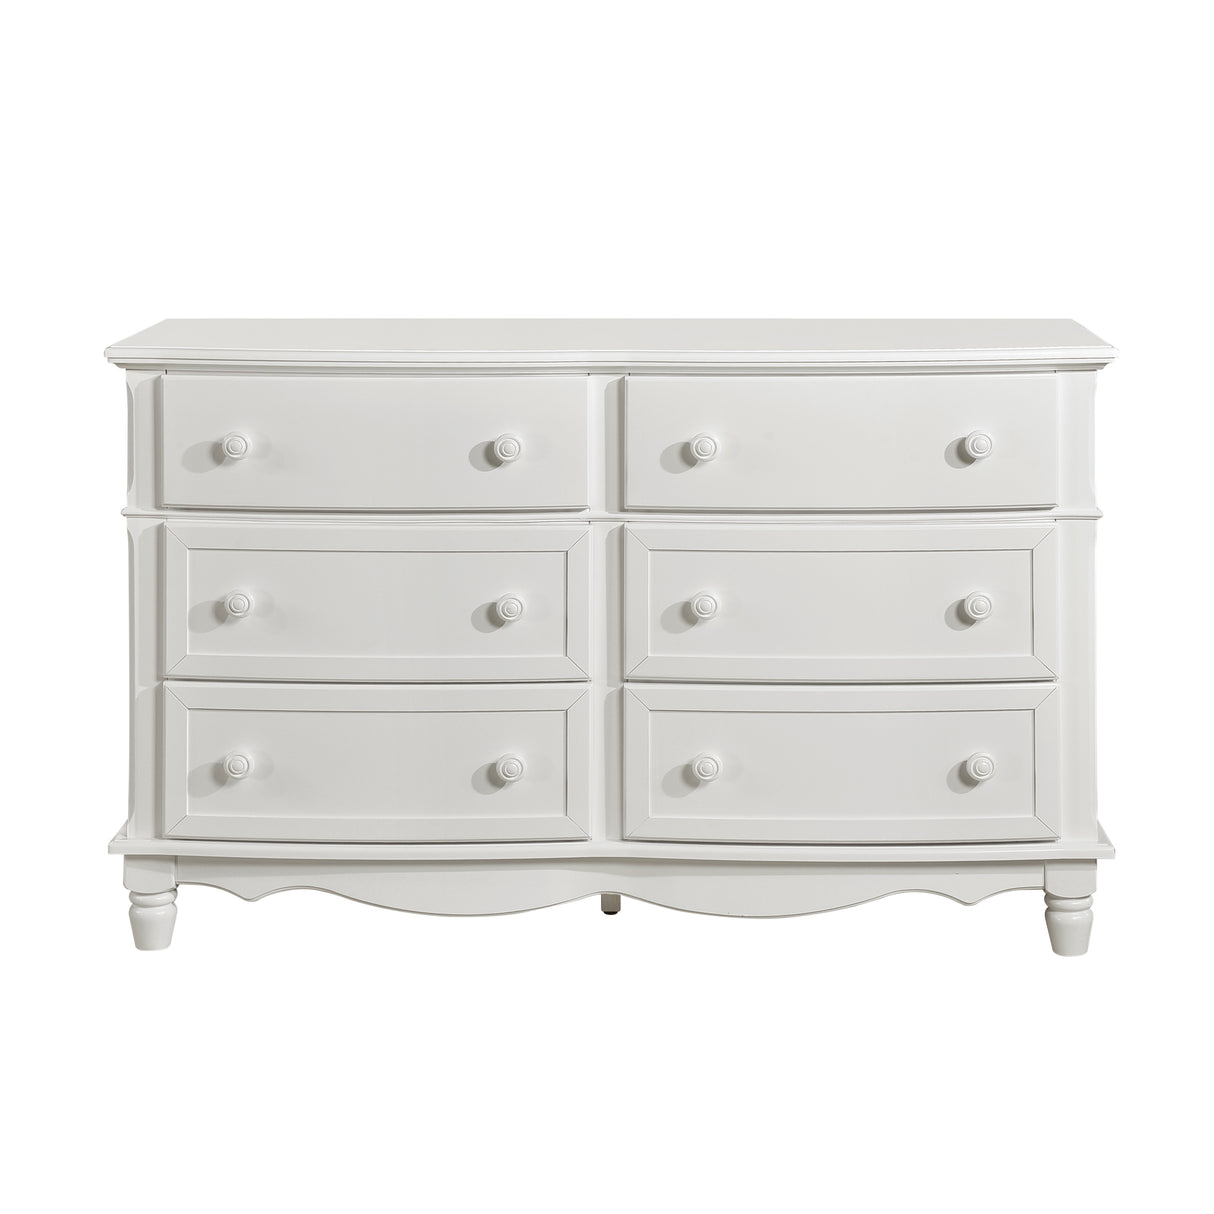 Youth-Clementine Bedroom Set